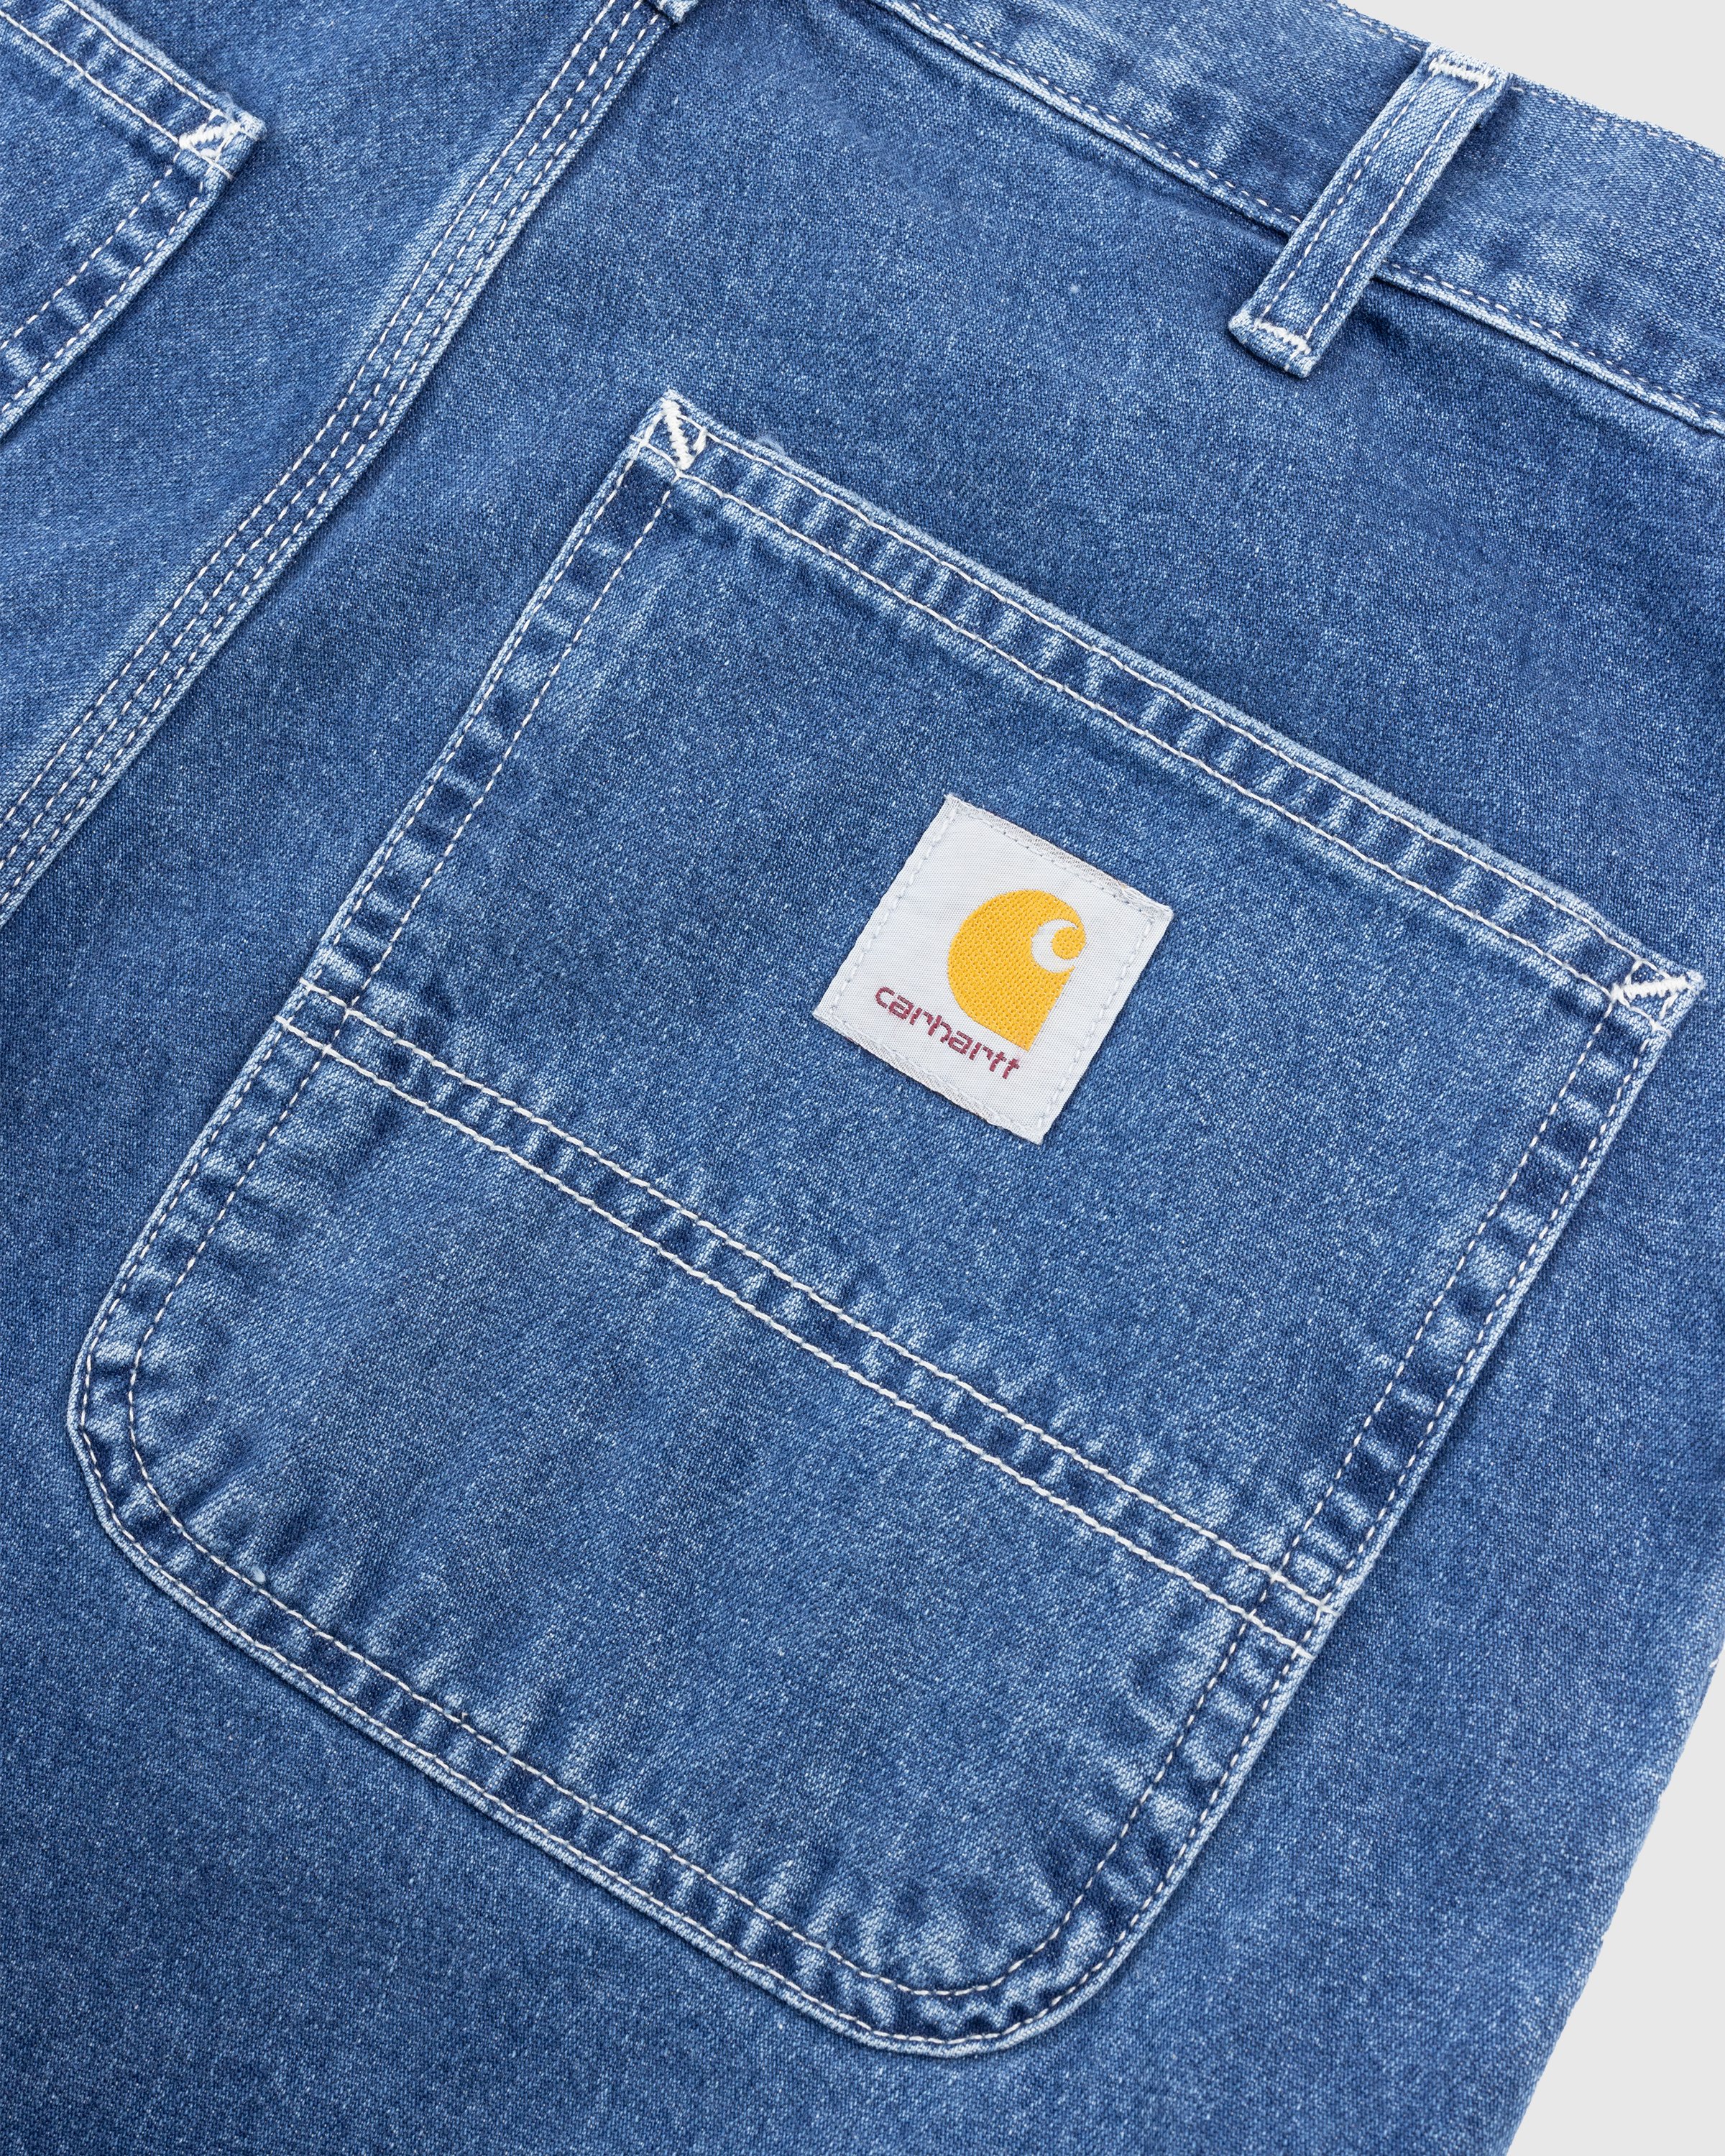 Carhartt WIP - Simple Pant Blue/Stone-Washed - Clothing - Blue - Image 6